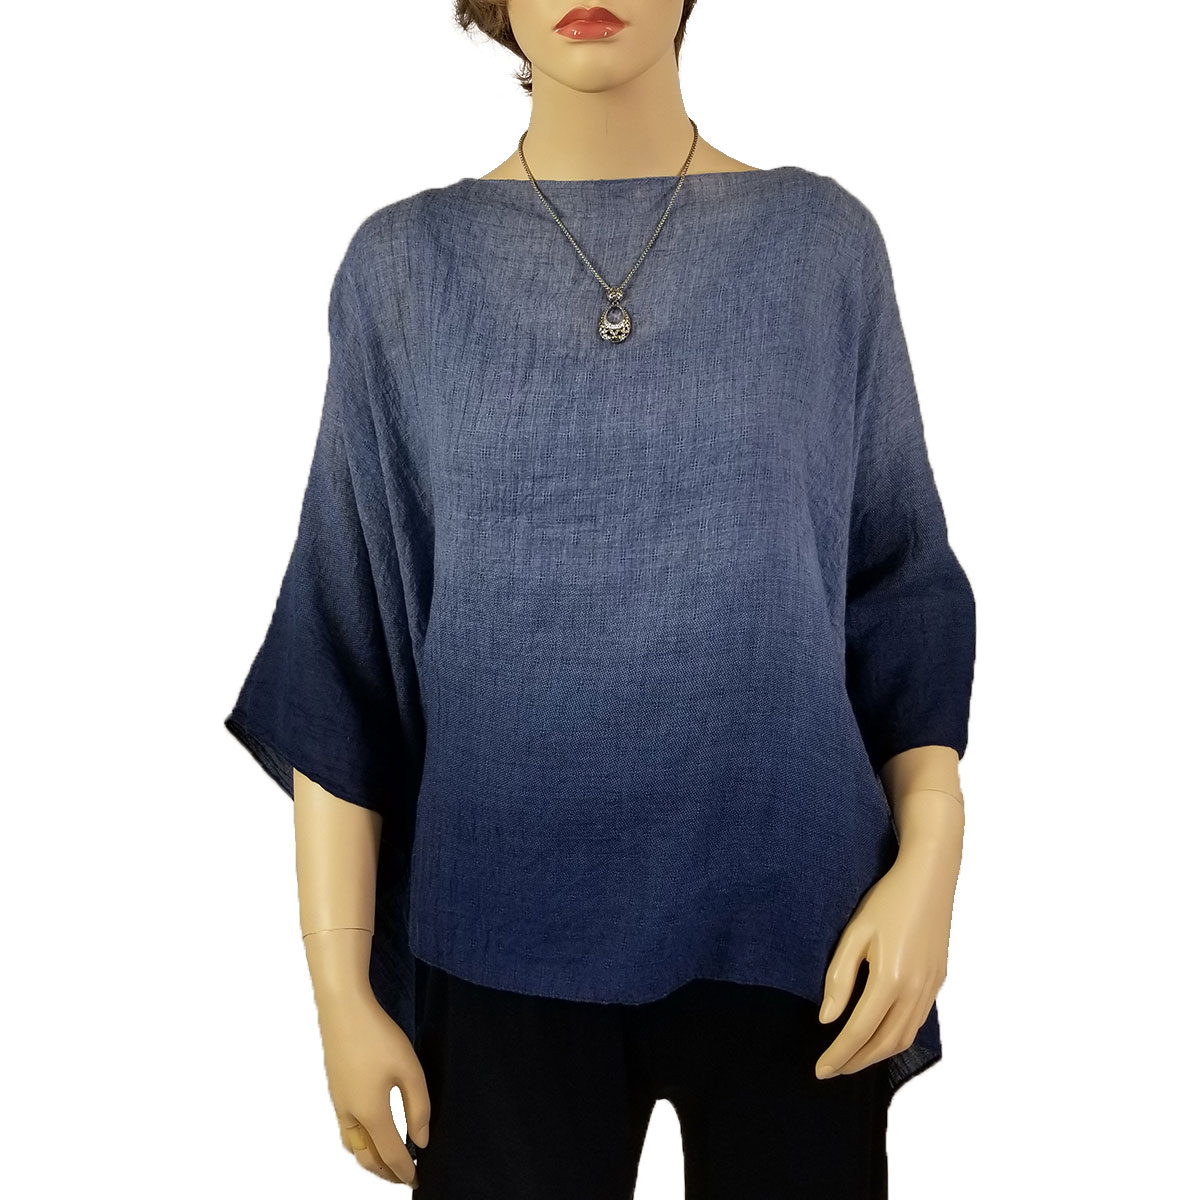 1582 - Blues<br>
Cotton Feel Ombre Poncho
